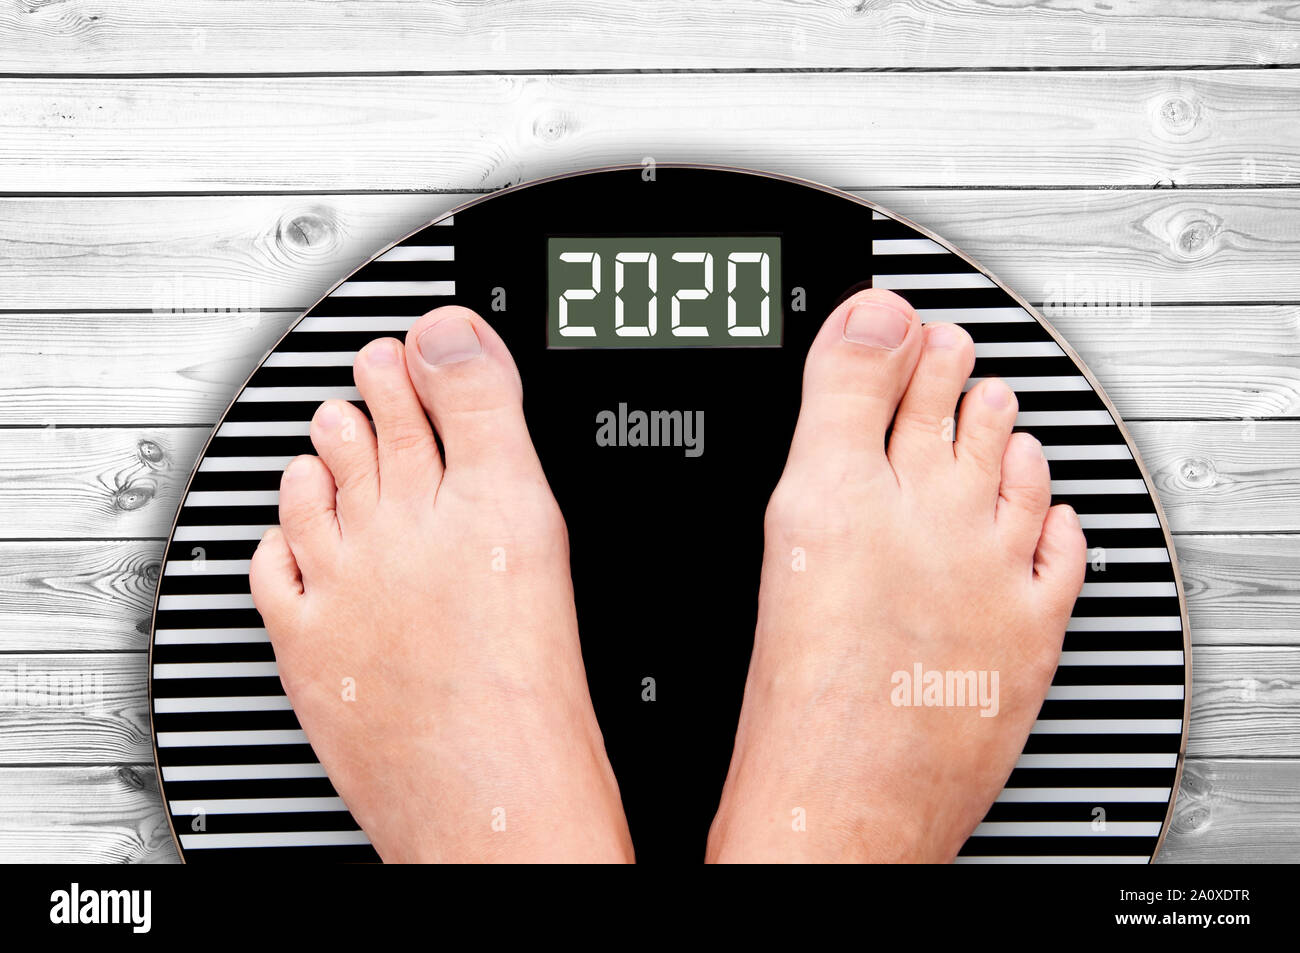 https://c8.alamy.com/comp/2A0XDTR/2020-feet-on-a-weight-scale-on-white-planks-new-year-and-holiday-food-nutrition-and-diet-concept-2A0XDTR.jpg